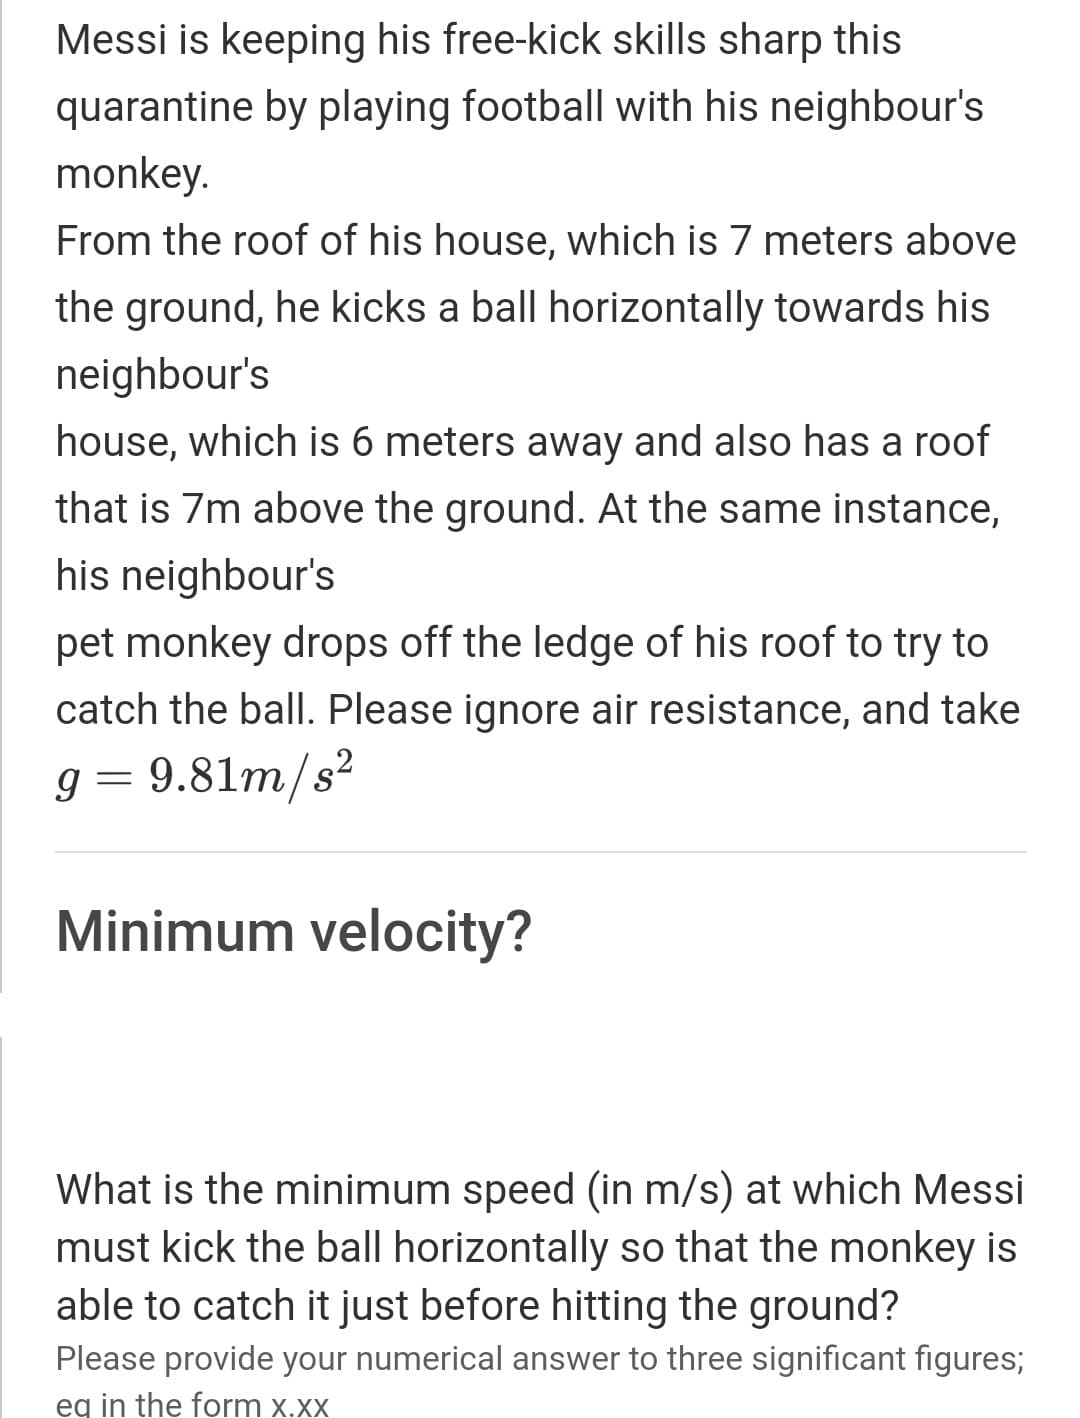 Messi is keeping his free-kick skills sharp this
quarantine by playing football with his neighbour's
monkey.
From the roof of his house, which is 7 meters above
the ground, he kicks a ball horizontally towards his
neighbour's
house, which is 6 meters away and also has a roof
that is 7m above the ground. At the same instance,
his neighbour's
pet monkey drops off the ledge of his roof to try to
catch the ball. Please ignore air resistance, and take
g = 9.81m/s²
Minimum velocity?
What is the minimum speed (in m/s) at which Messi
must kick the ball horizontally so that the monkey is
able to catch it just before hitting the ground?
Please provide your numerical answer to three significant figures;
eq in the form x.xx
